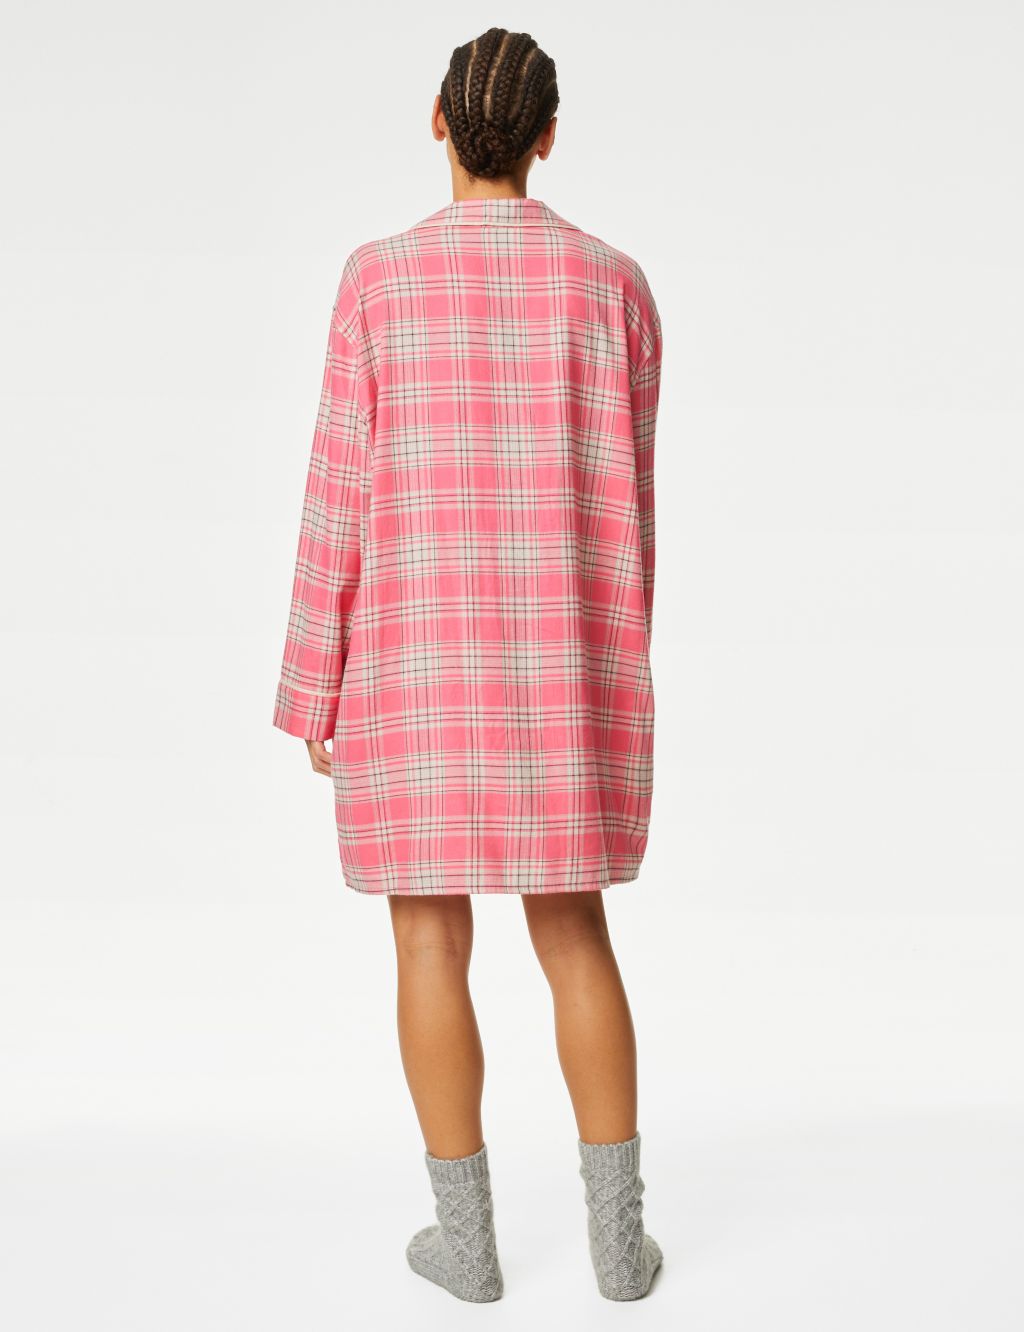 Cotton Blend Checked Nightshirt image 4